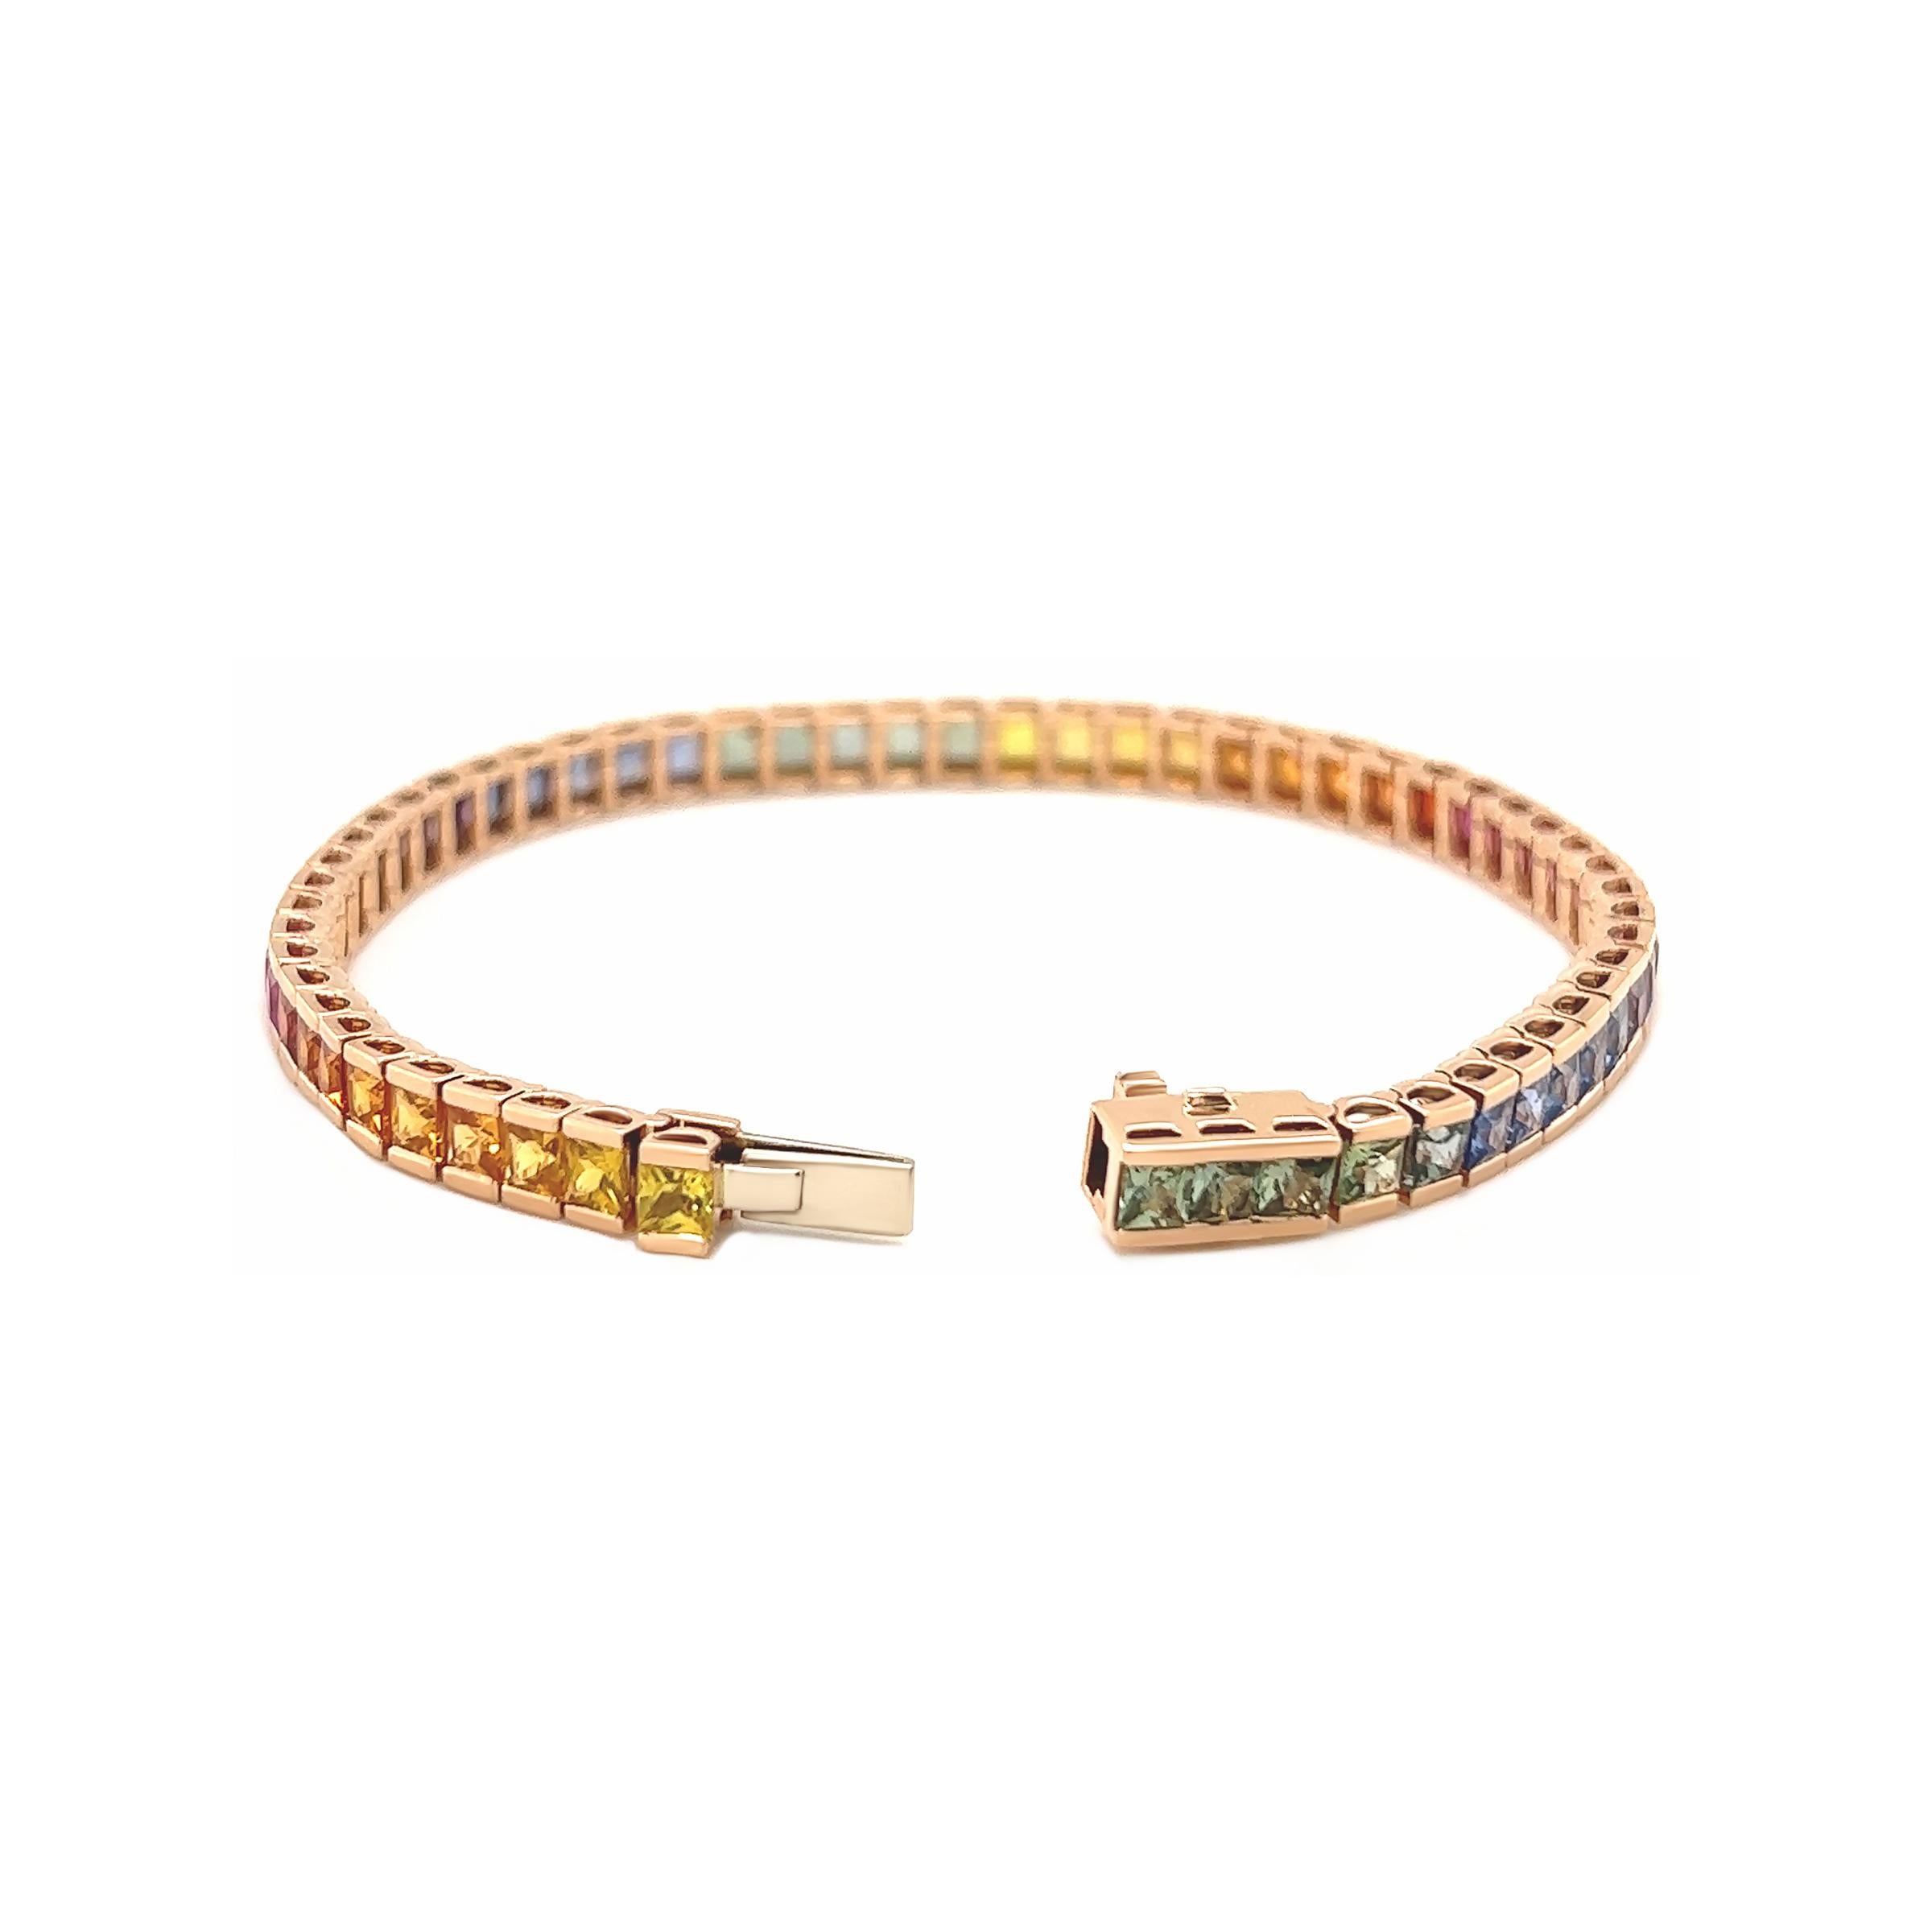 Natural sapphires perfectly hand selected for color, size and quality are laid out in rainbow. This 17cm bracelet demonstrates the transition of colors that have been carefully selected set in a high polished 18k rose gold. 

Rainbow Sapphires: